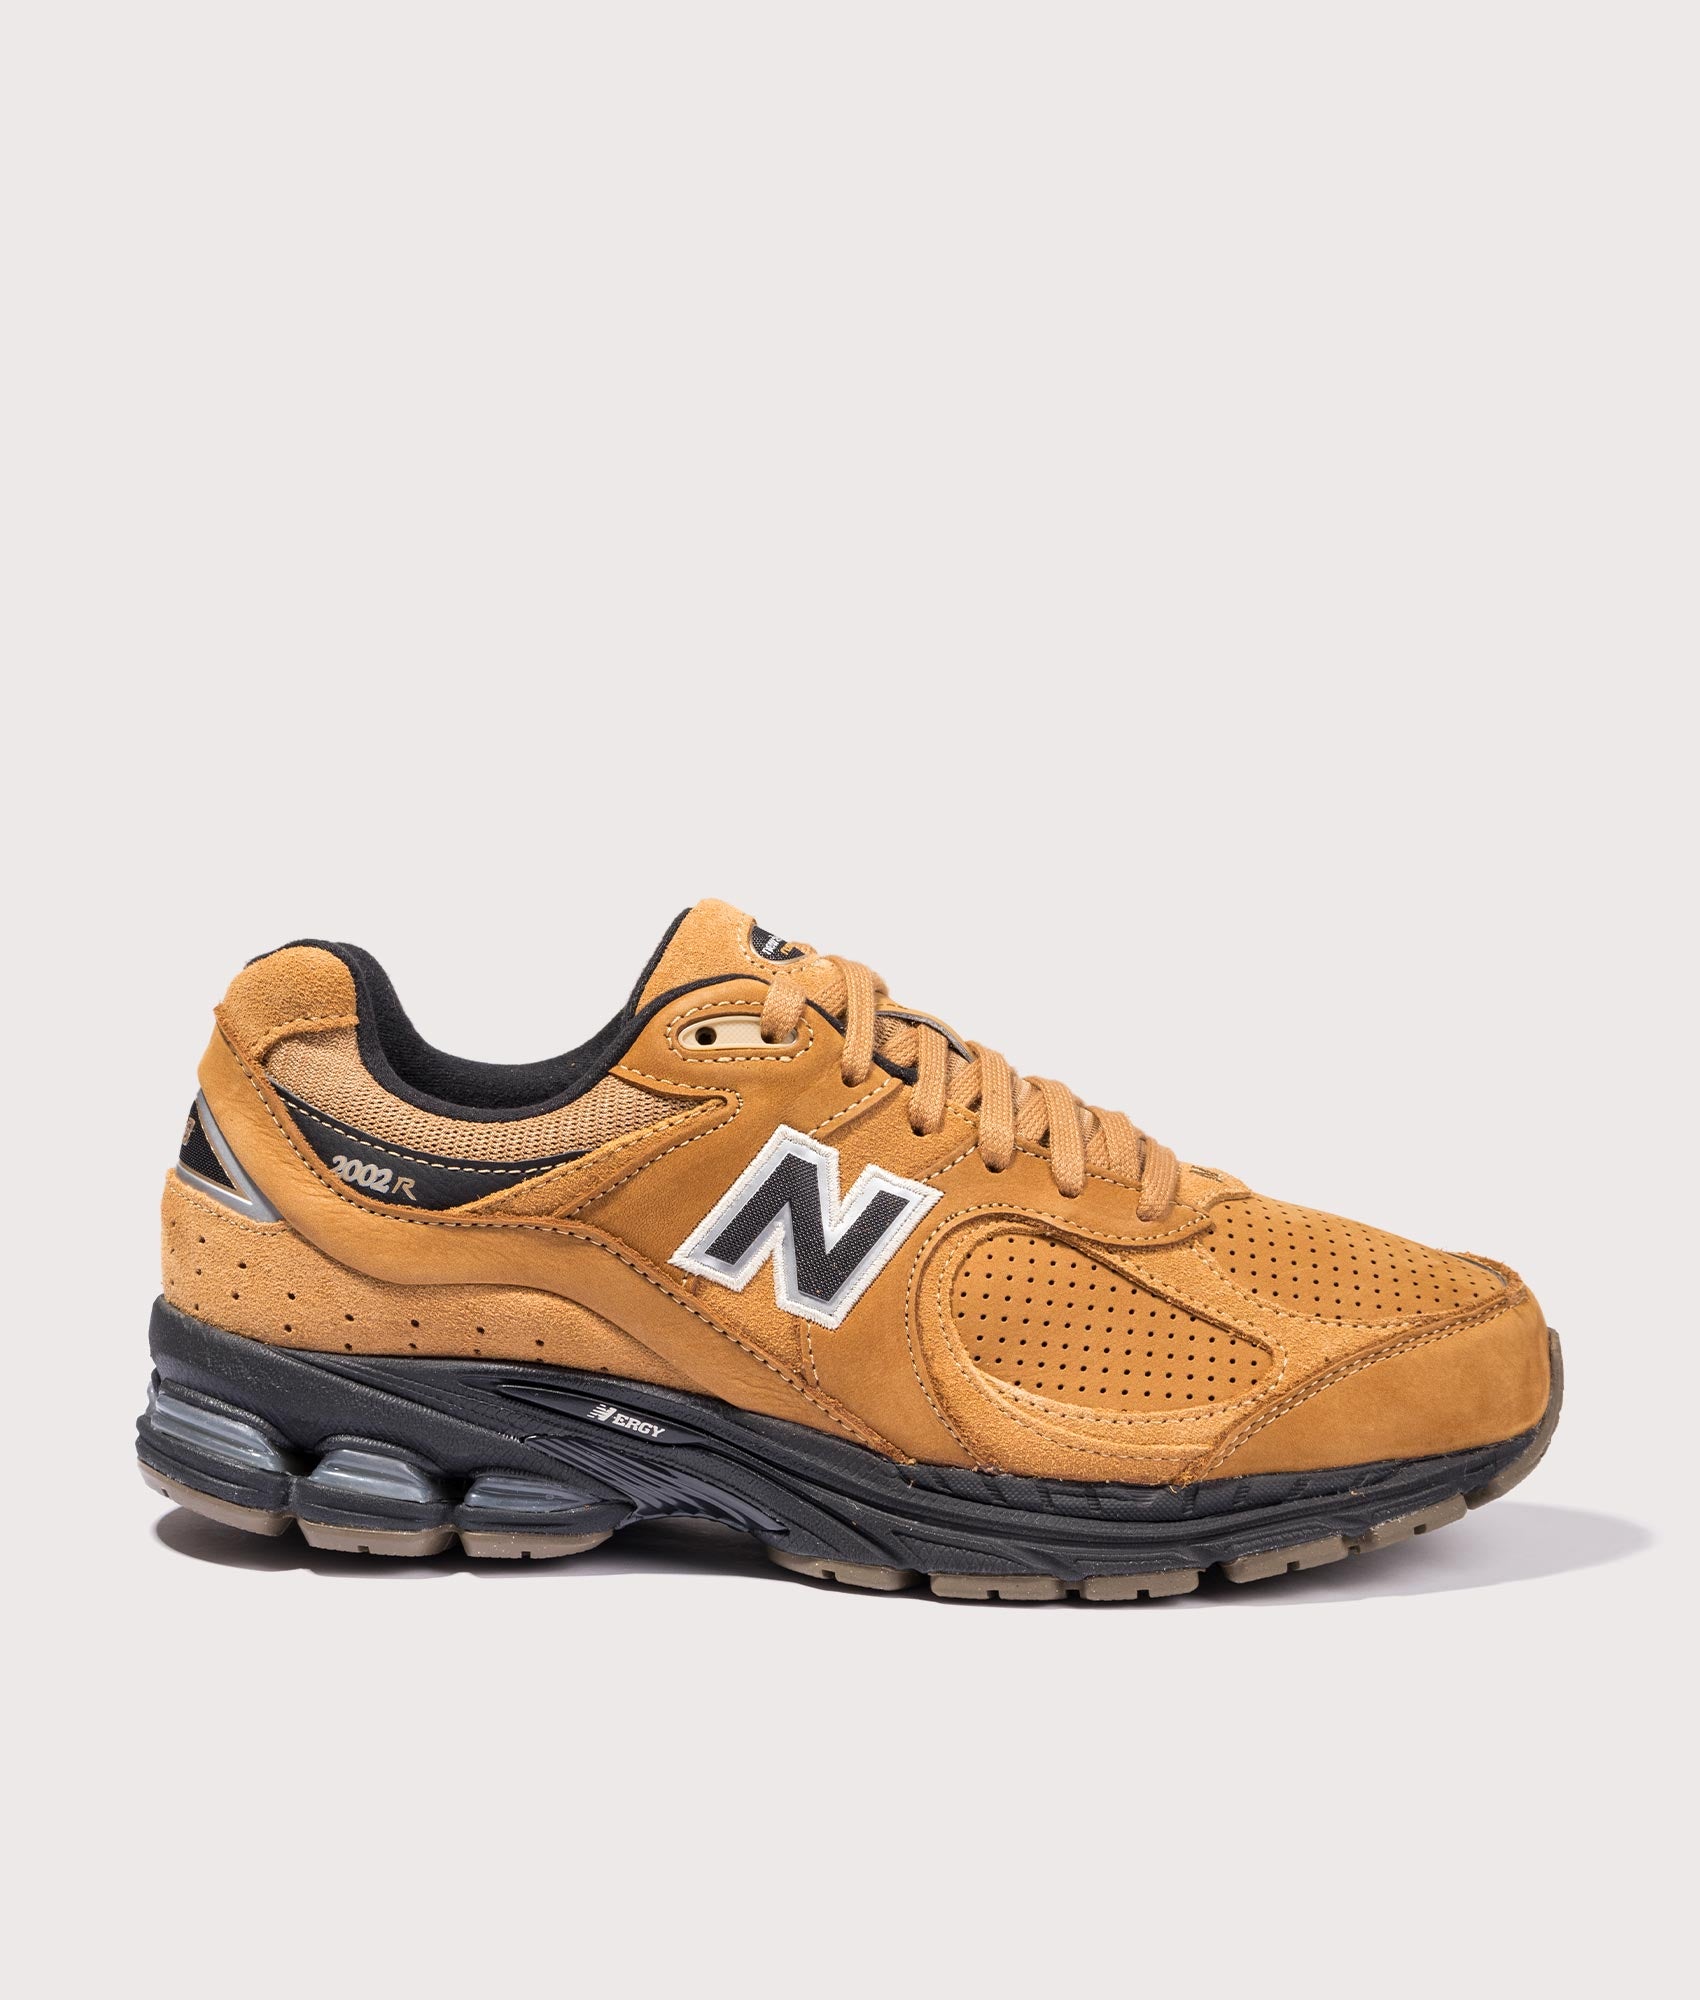 New Balance Mens 2002R Sneakers - Colour: M2002REI Tobacco - Size: 10